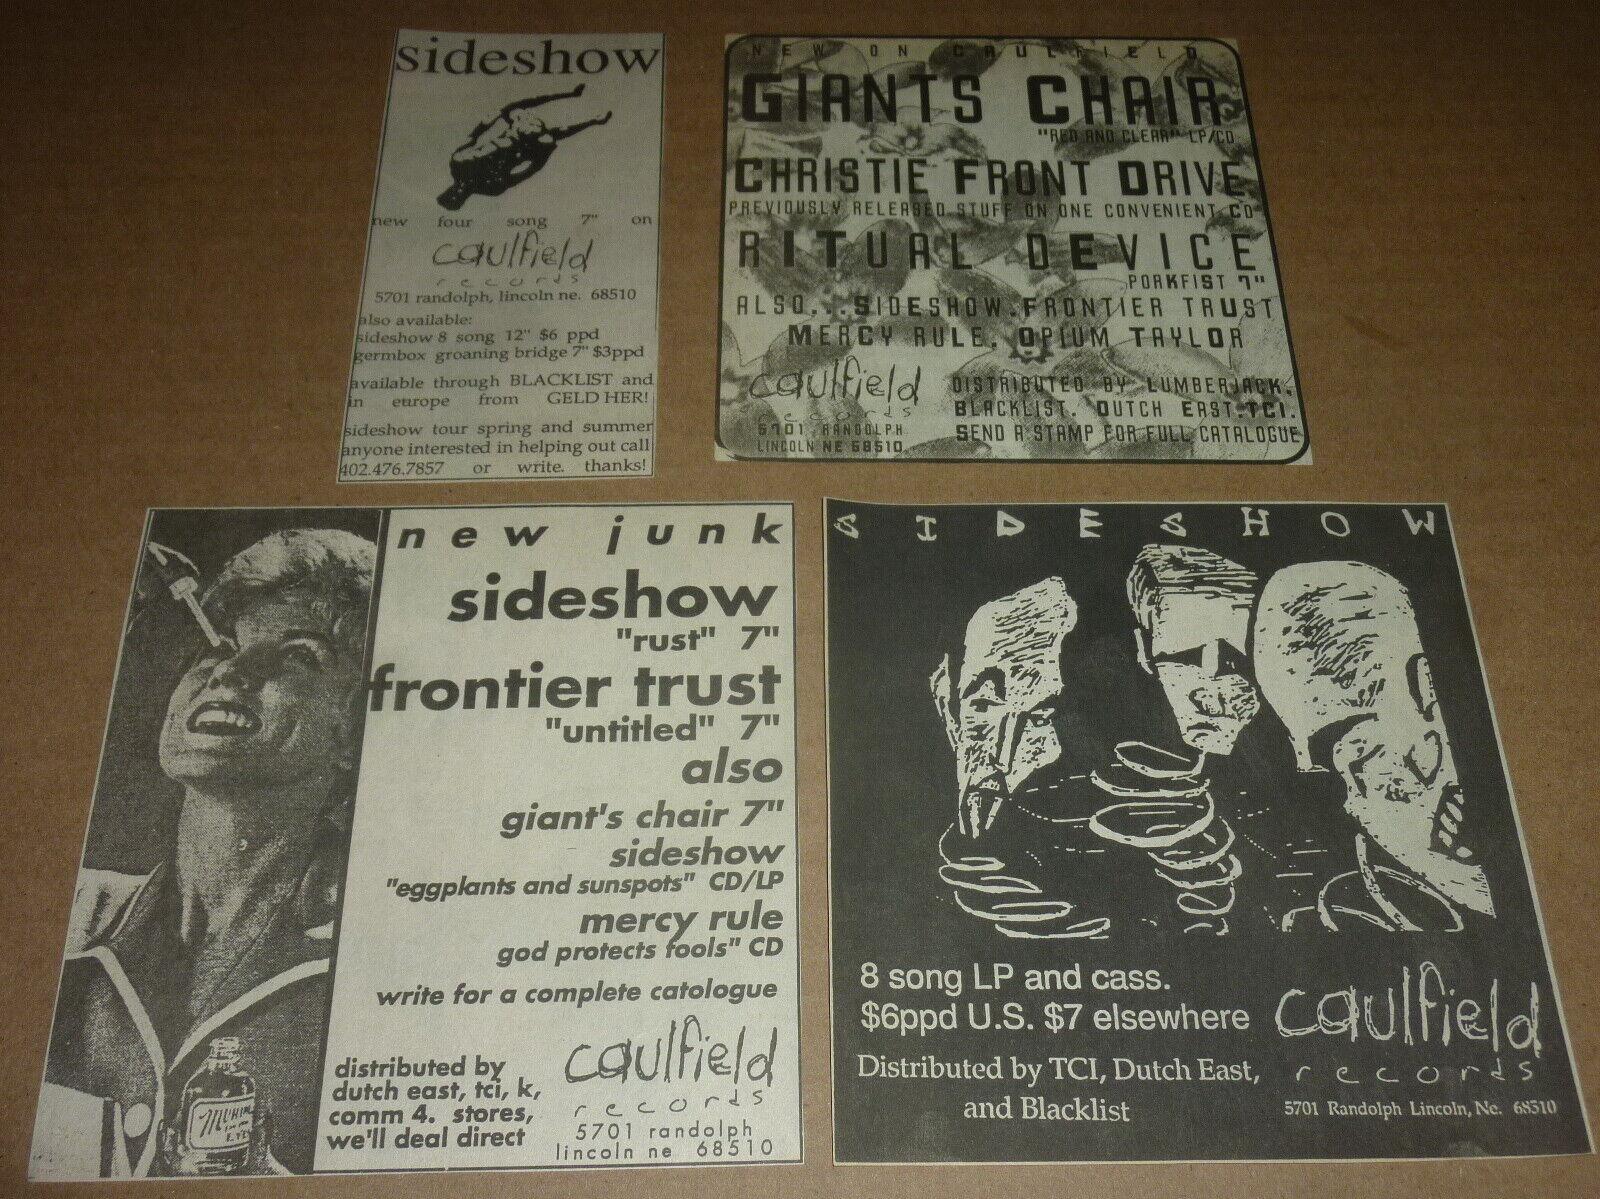 Caulfield Records CLIPPING LOT emo SIDESHOW christie front drive